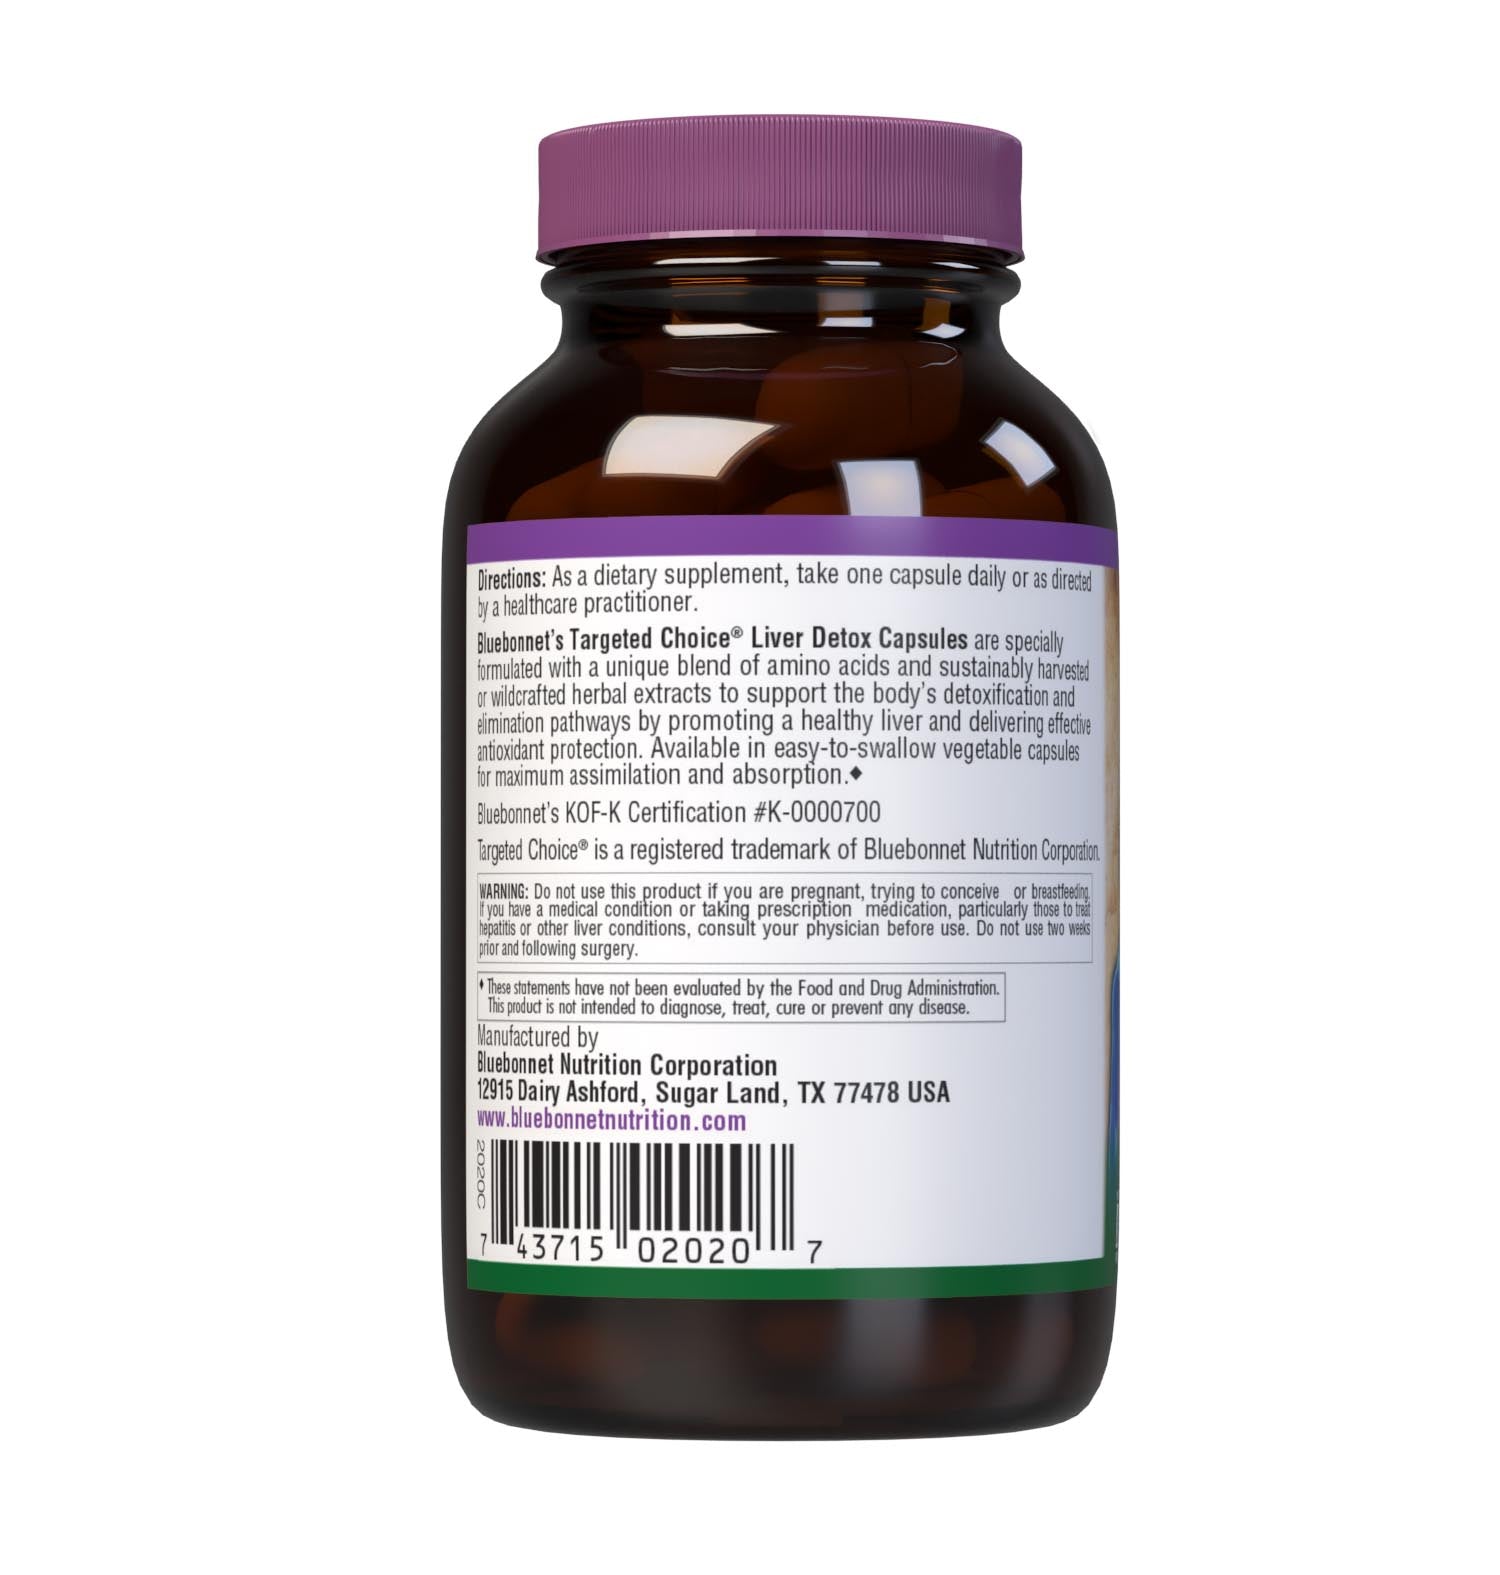 Bluebonnet’s Targeted Choice Liver Detox 30 Vegetable Capsules are specially formulated with a unique blend of amino acids and sustainably harvested or wildcrafted herbal extracts to support the body’s detoxification and elimination pathways by promoting a healthy liver and delivering effective antioxidant protection. Description panel. #size_30 count